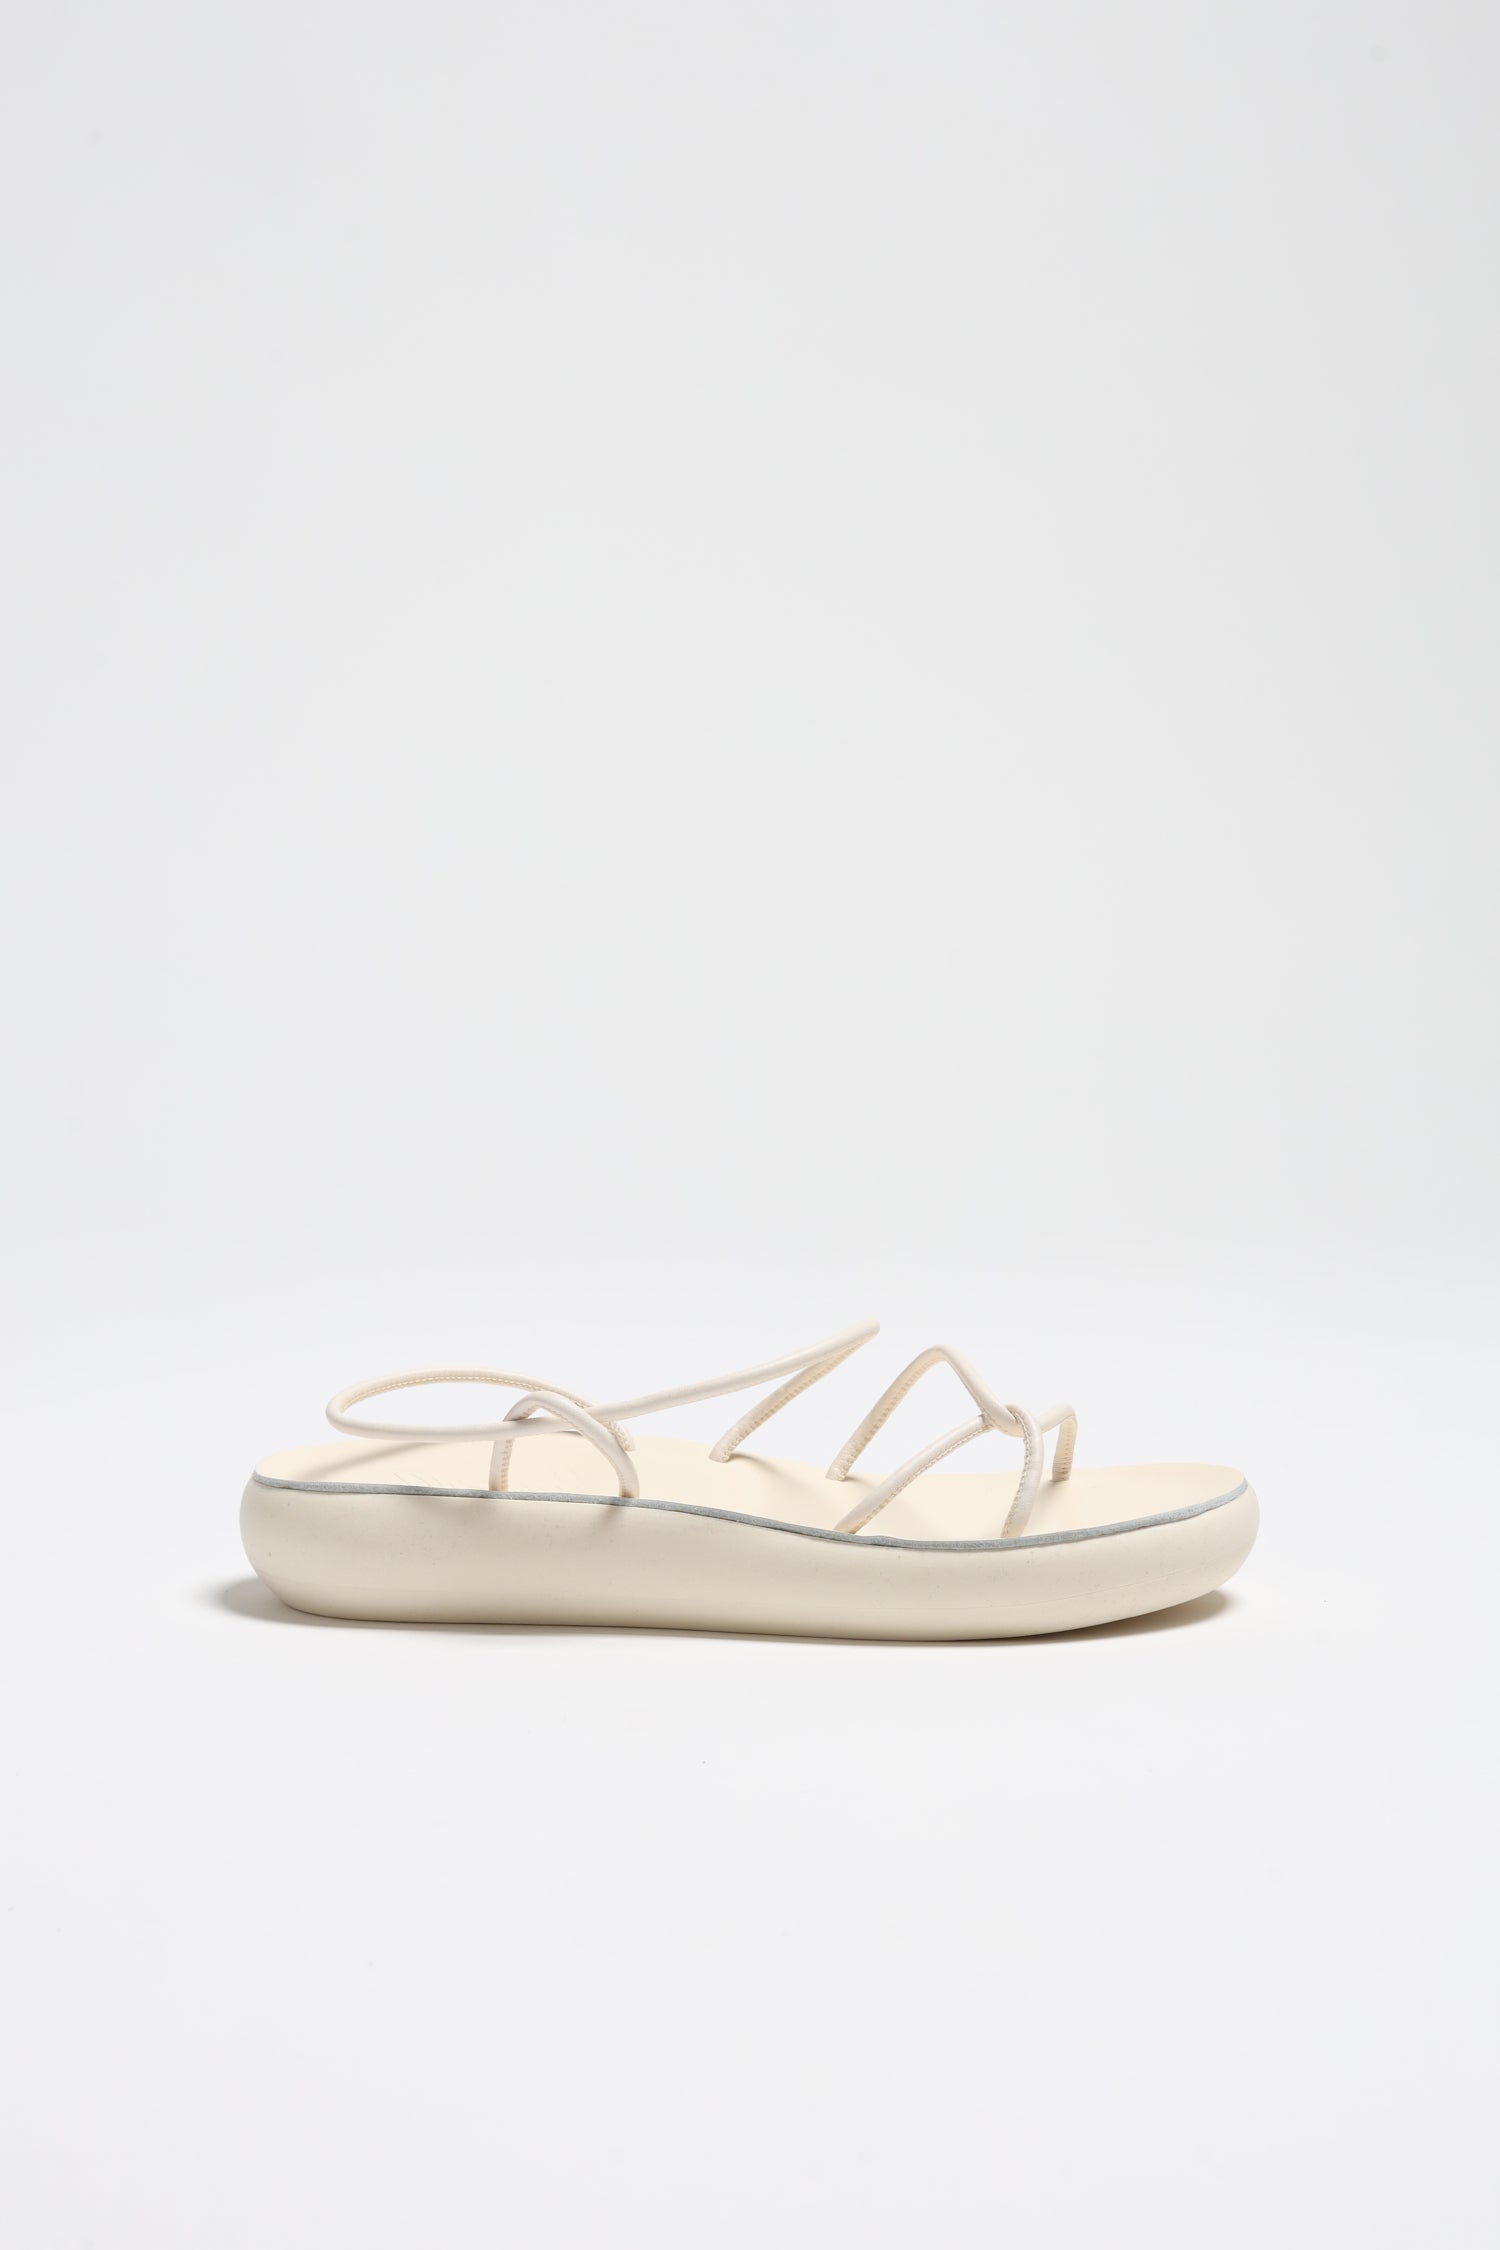 Sandale Taxidi Comfort in Off-WhiteAncient Greek Sandals - Anita Hass